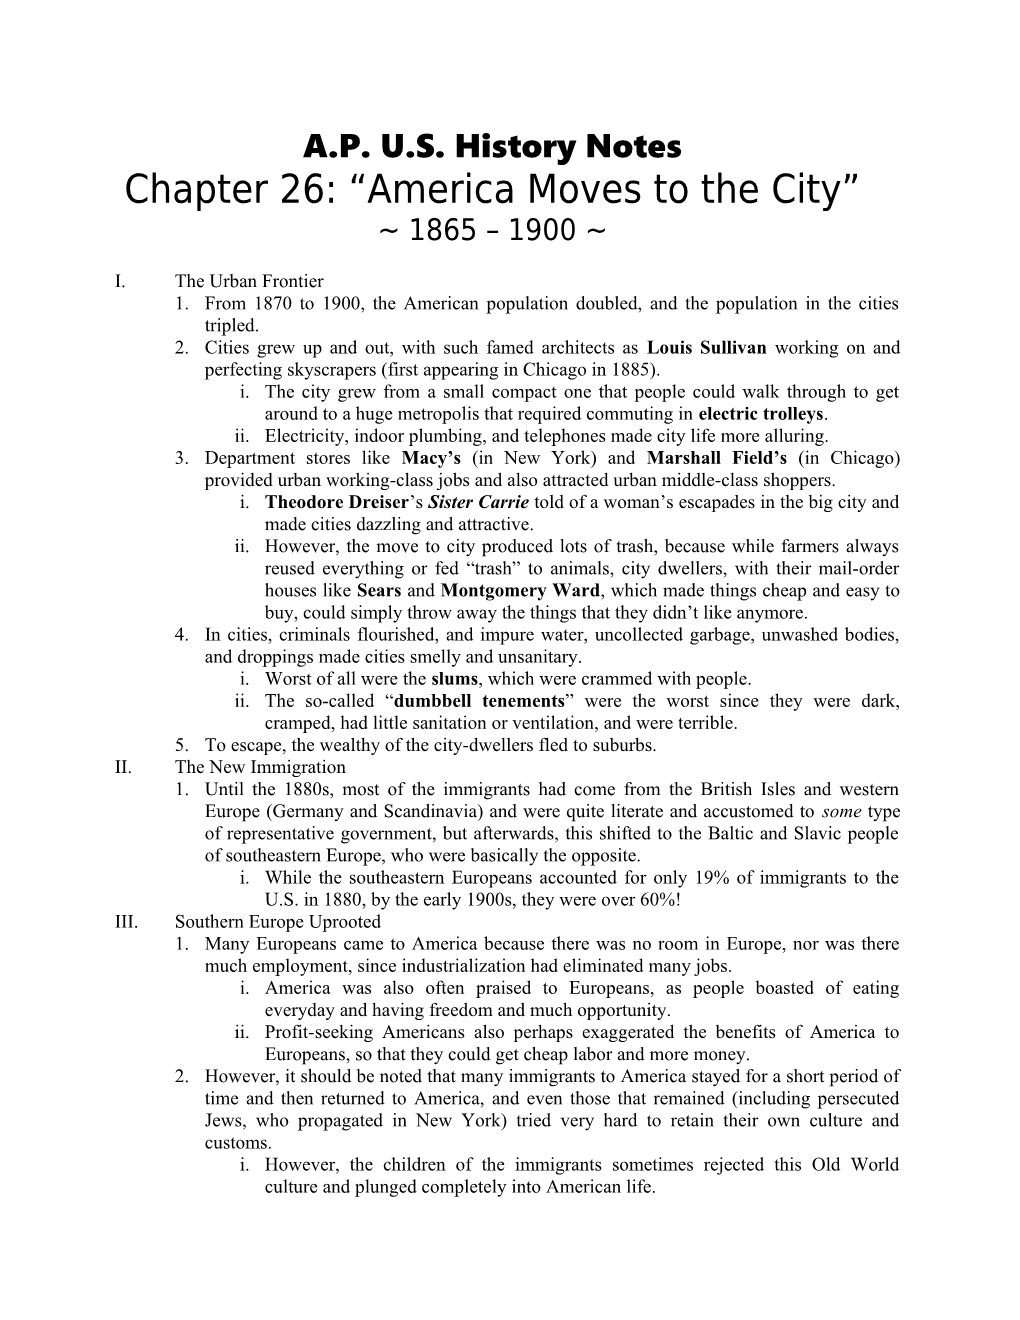 Chapter 26: America Moves to the City